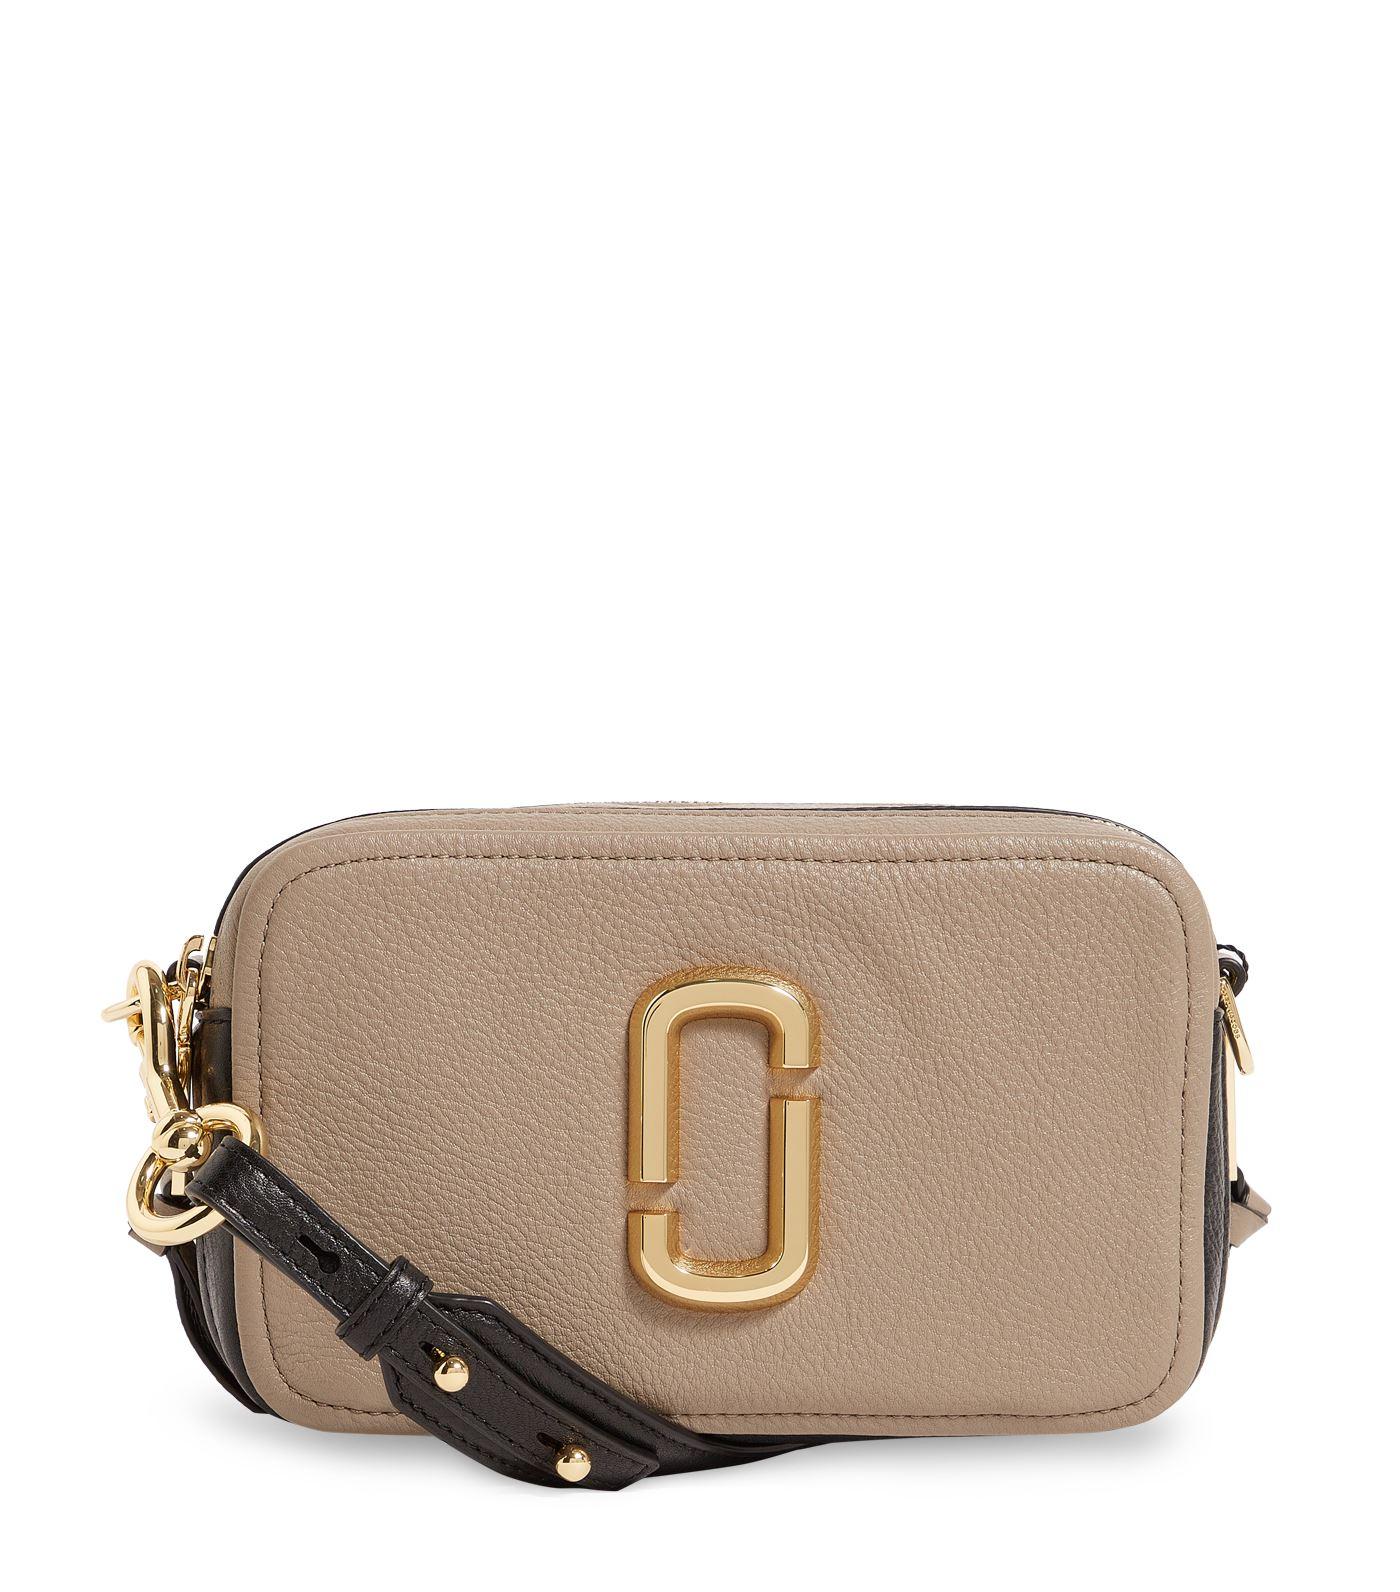 Marc Jacobs Leather Softshot Cross Body Bag in Beige (Natural) - Lyst